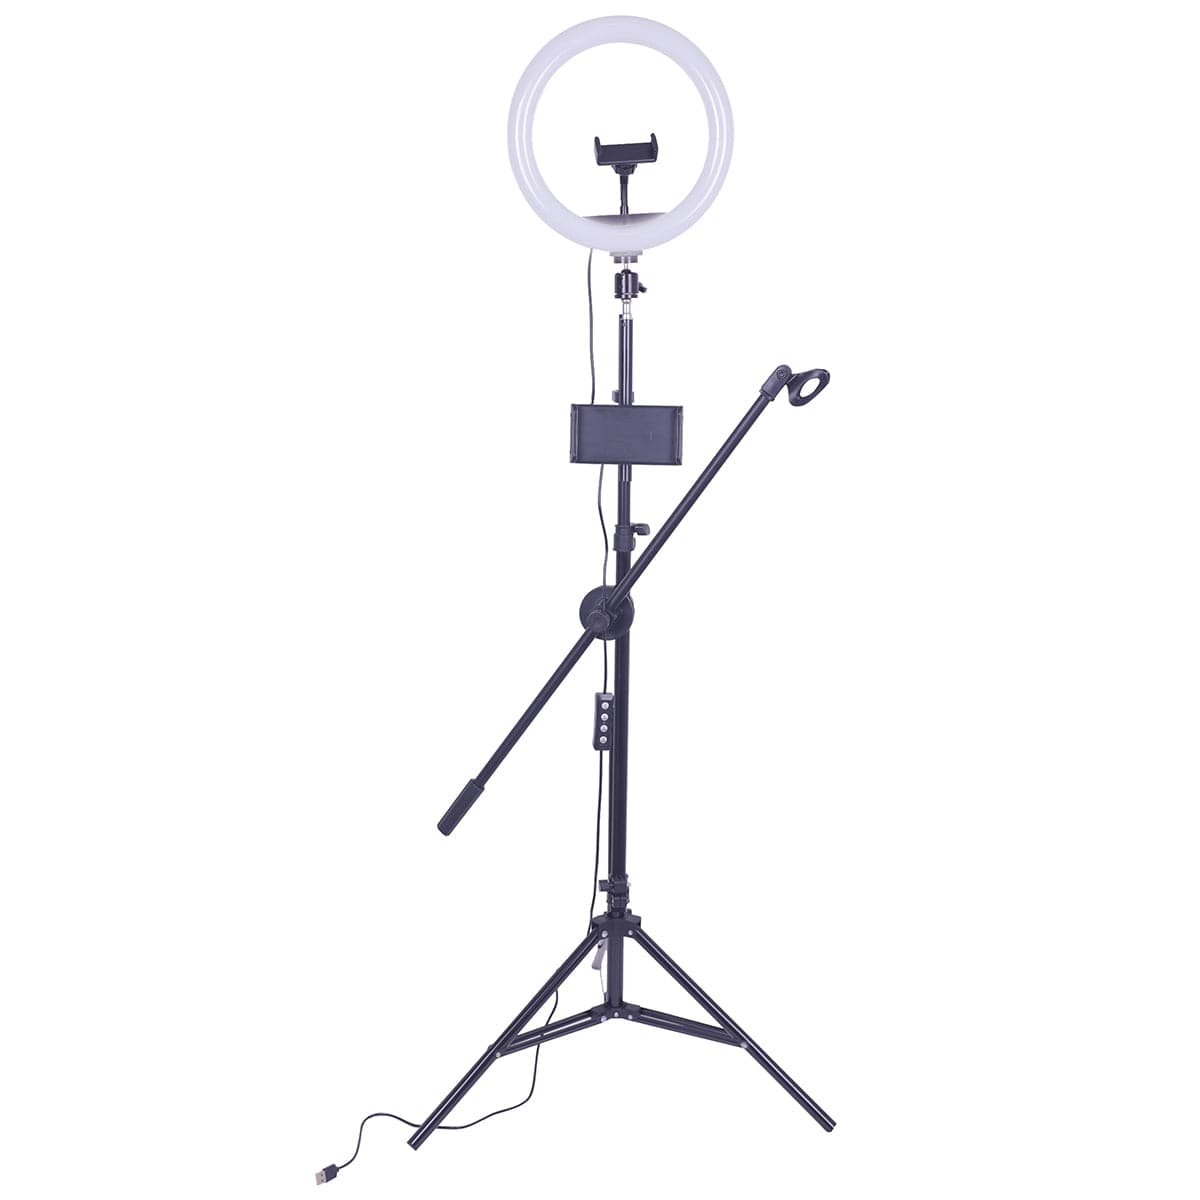 iDance Sing Share Live Video Streaming Kit